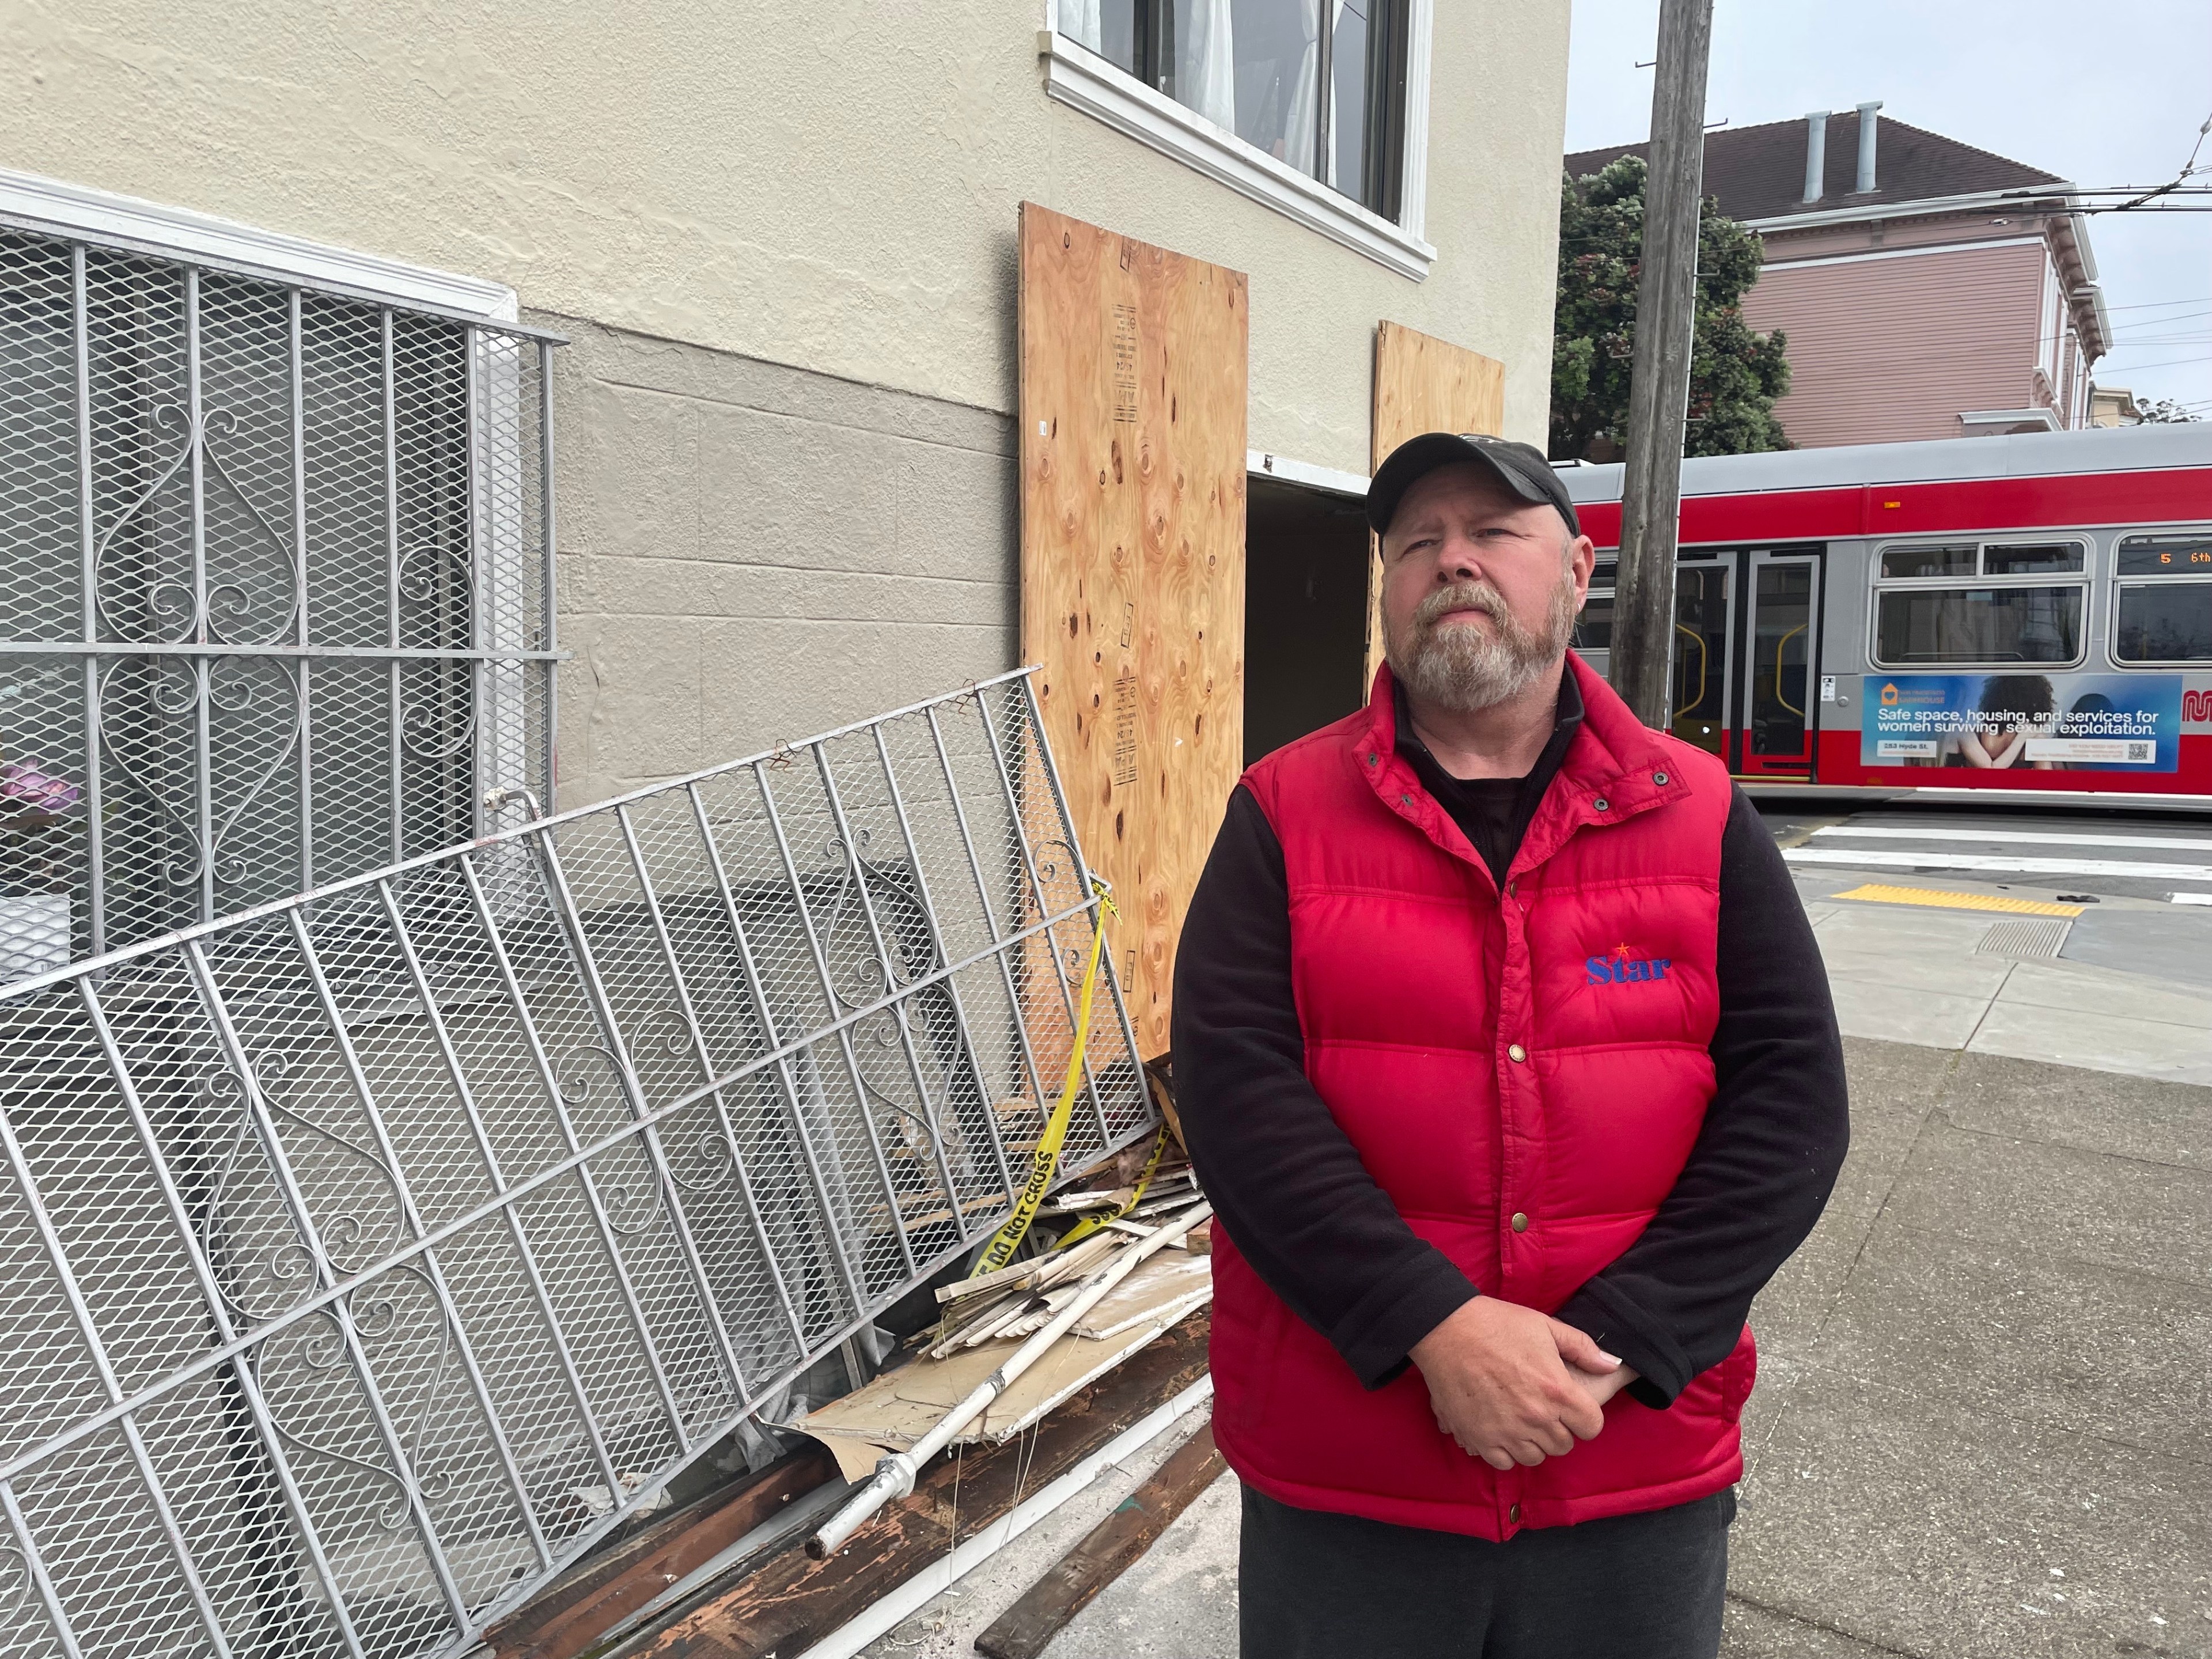 A man in a red vest stands in front of a building with boarded-up windows, near a metal fence and red trolley bus in the background.